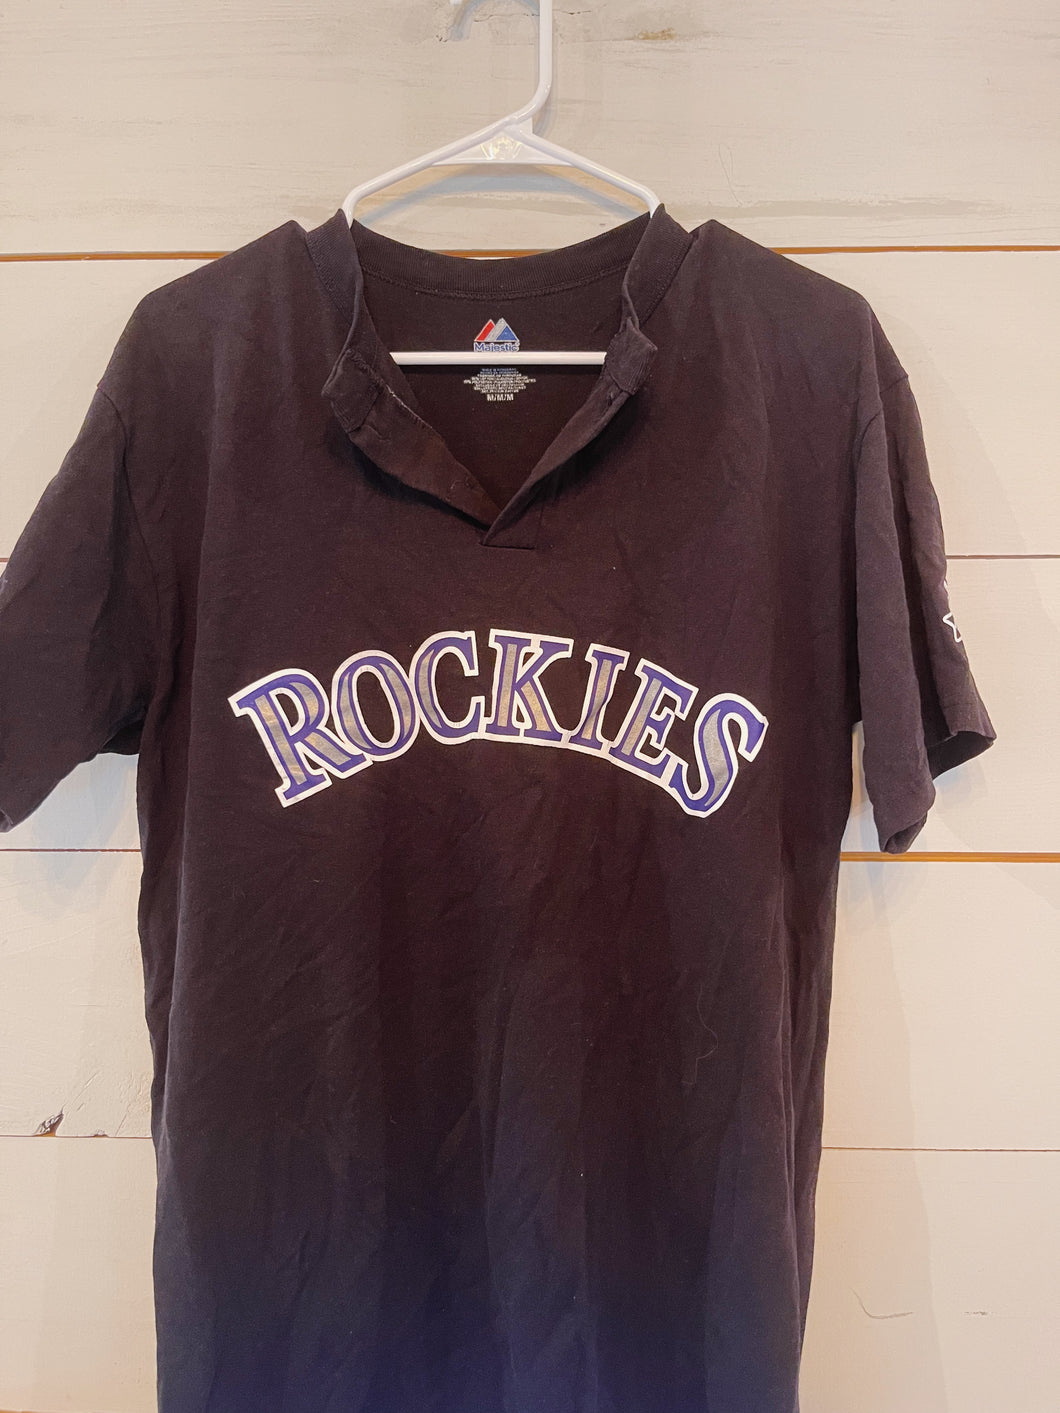 Rockies Button Top